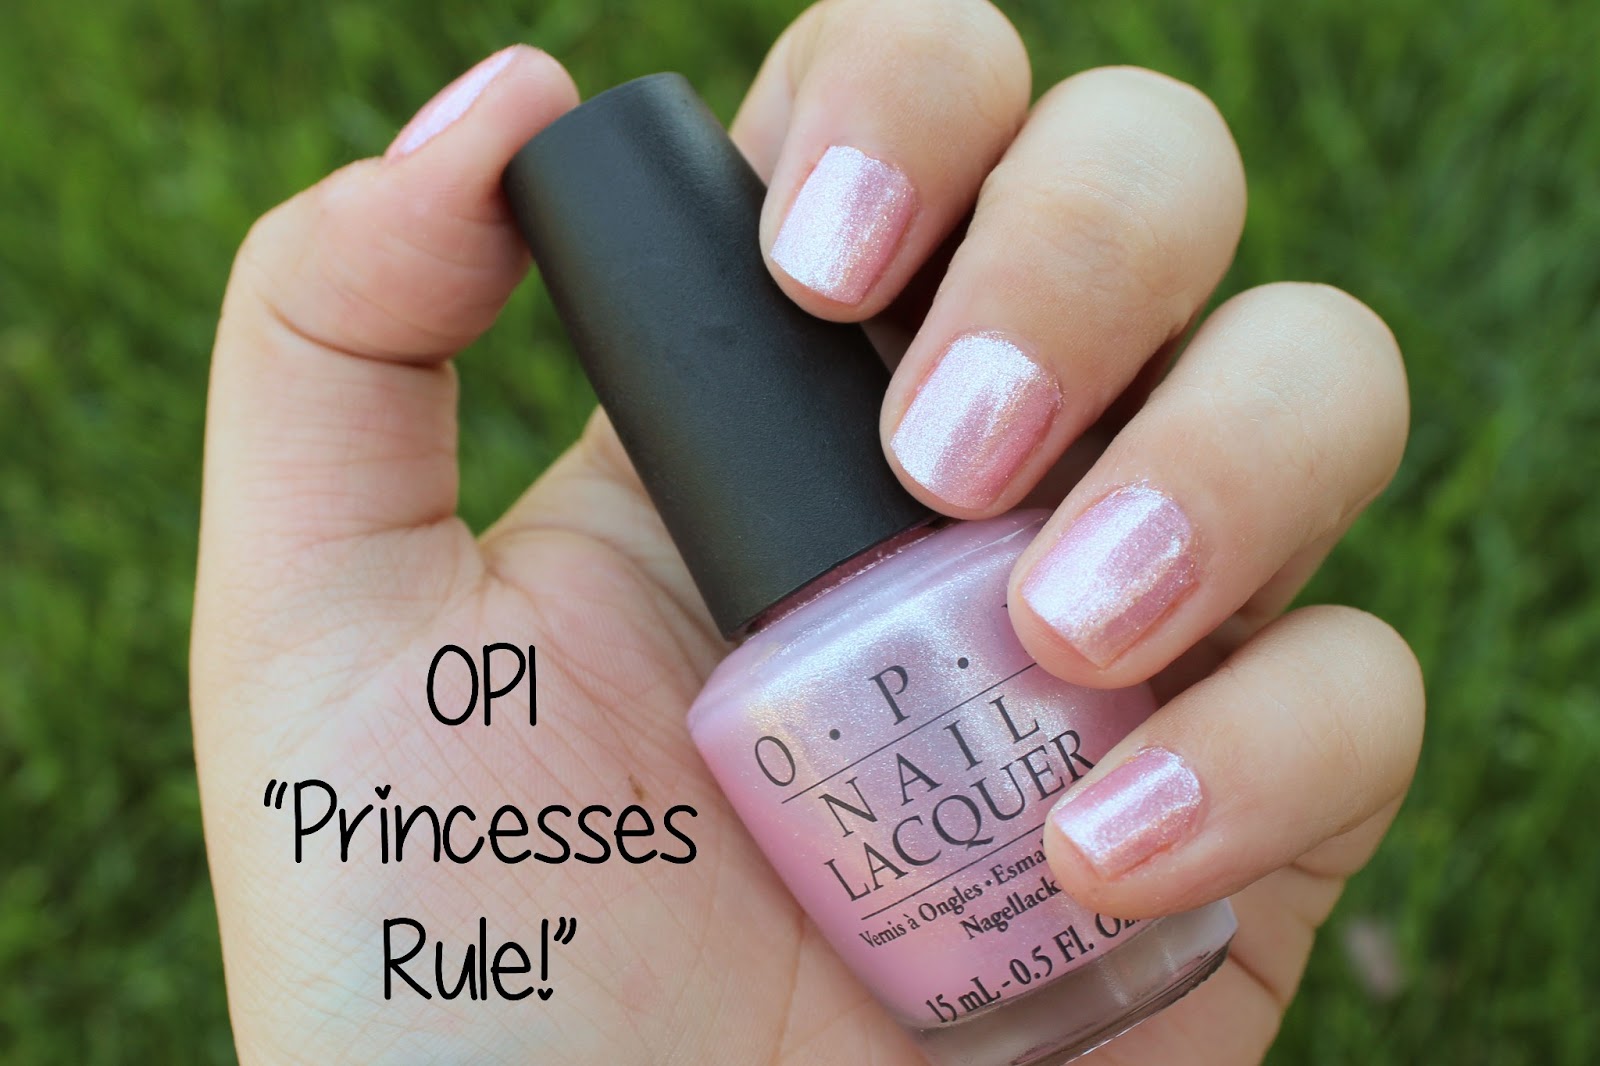 5. OPI Nail Lacquer in "Princesses Rule!" - wide 9